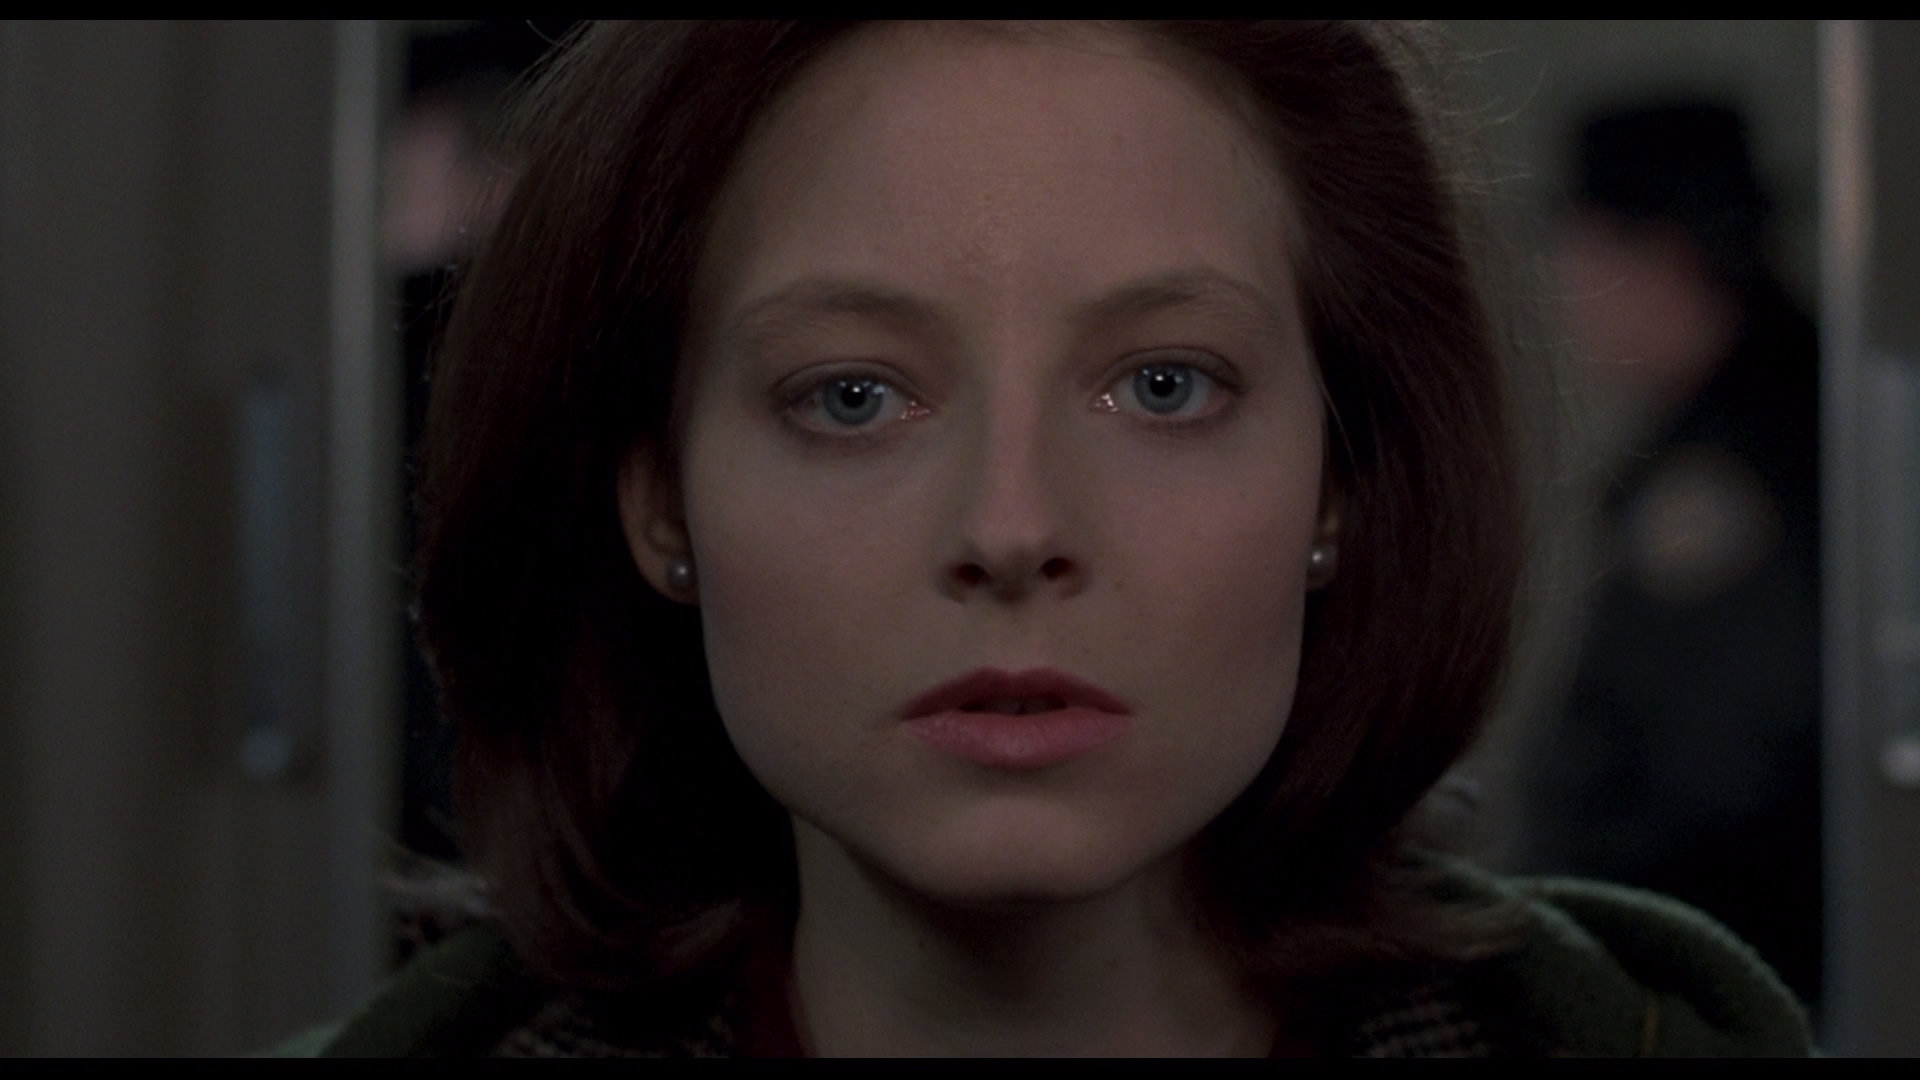 High resolution The Silence Of The Lambs full hd wallpaper ID:438792 for desktop